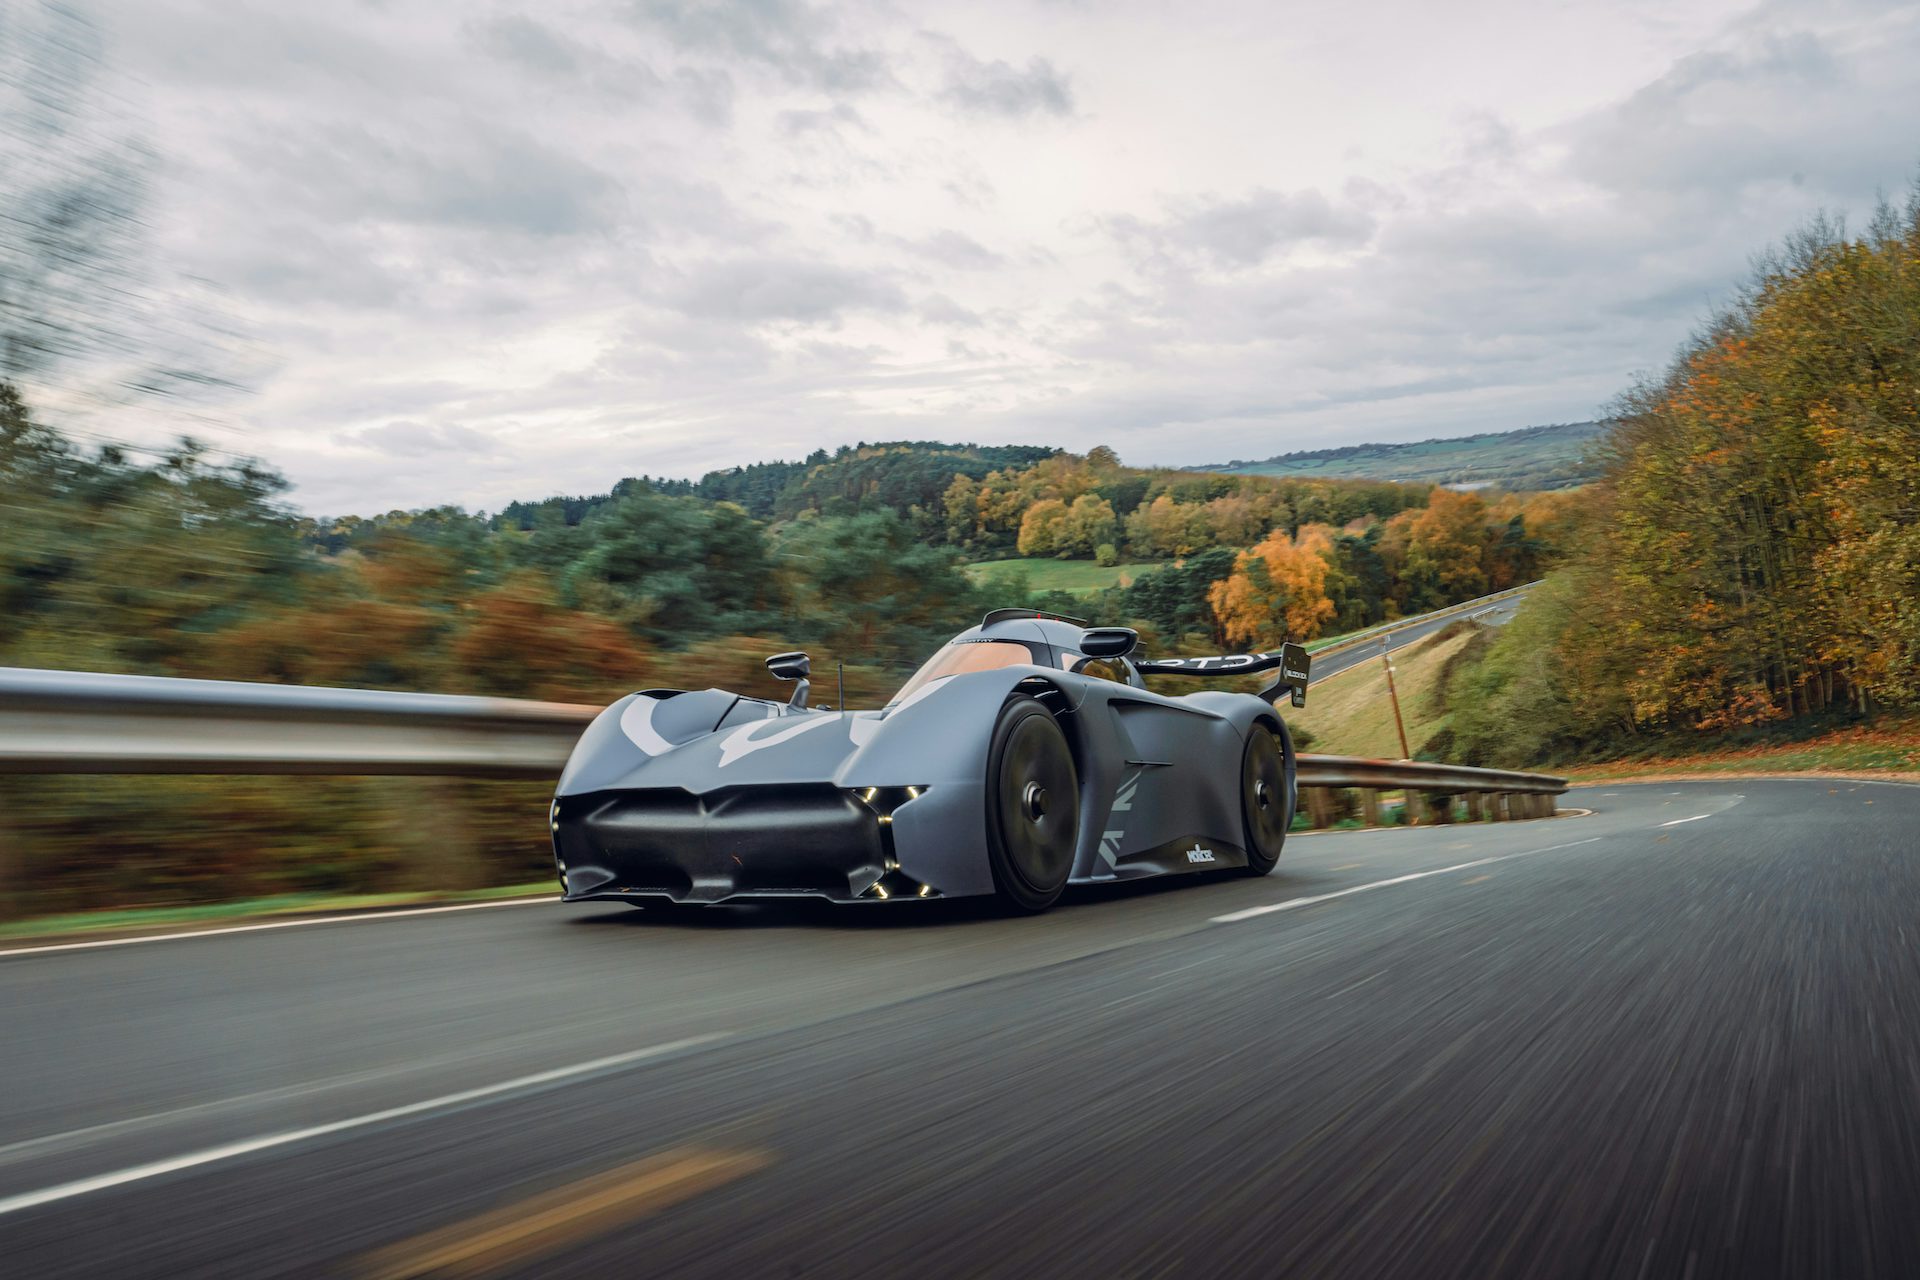 McMurtry Spéirling review driving the fastest accelerating road car in